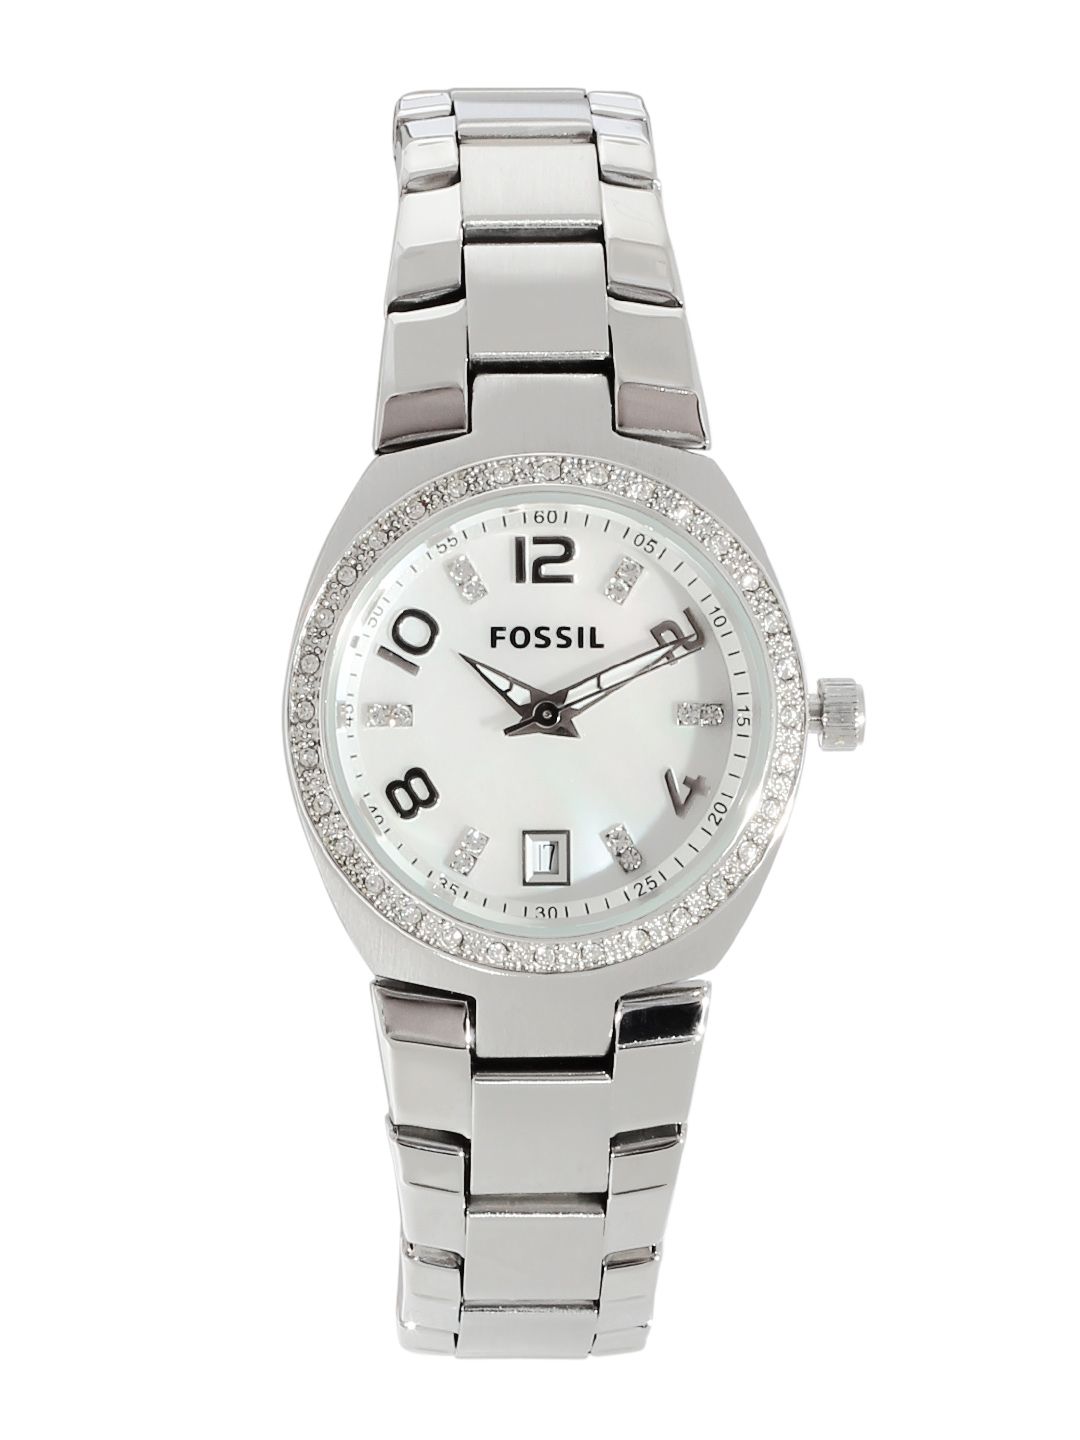 Fossil Women White Dial Watch AM4141 Price in India